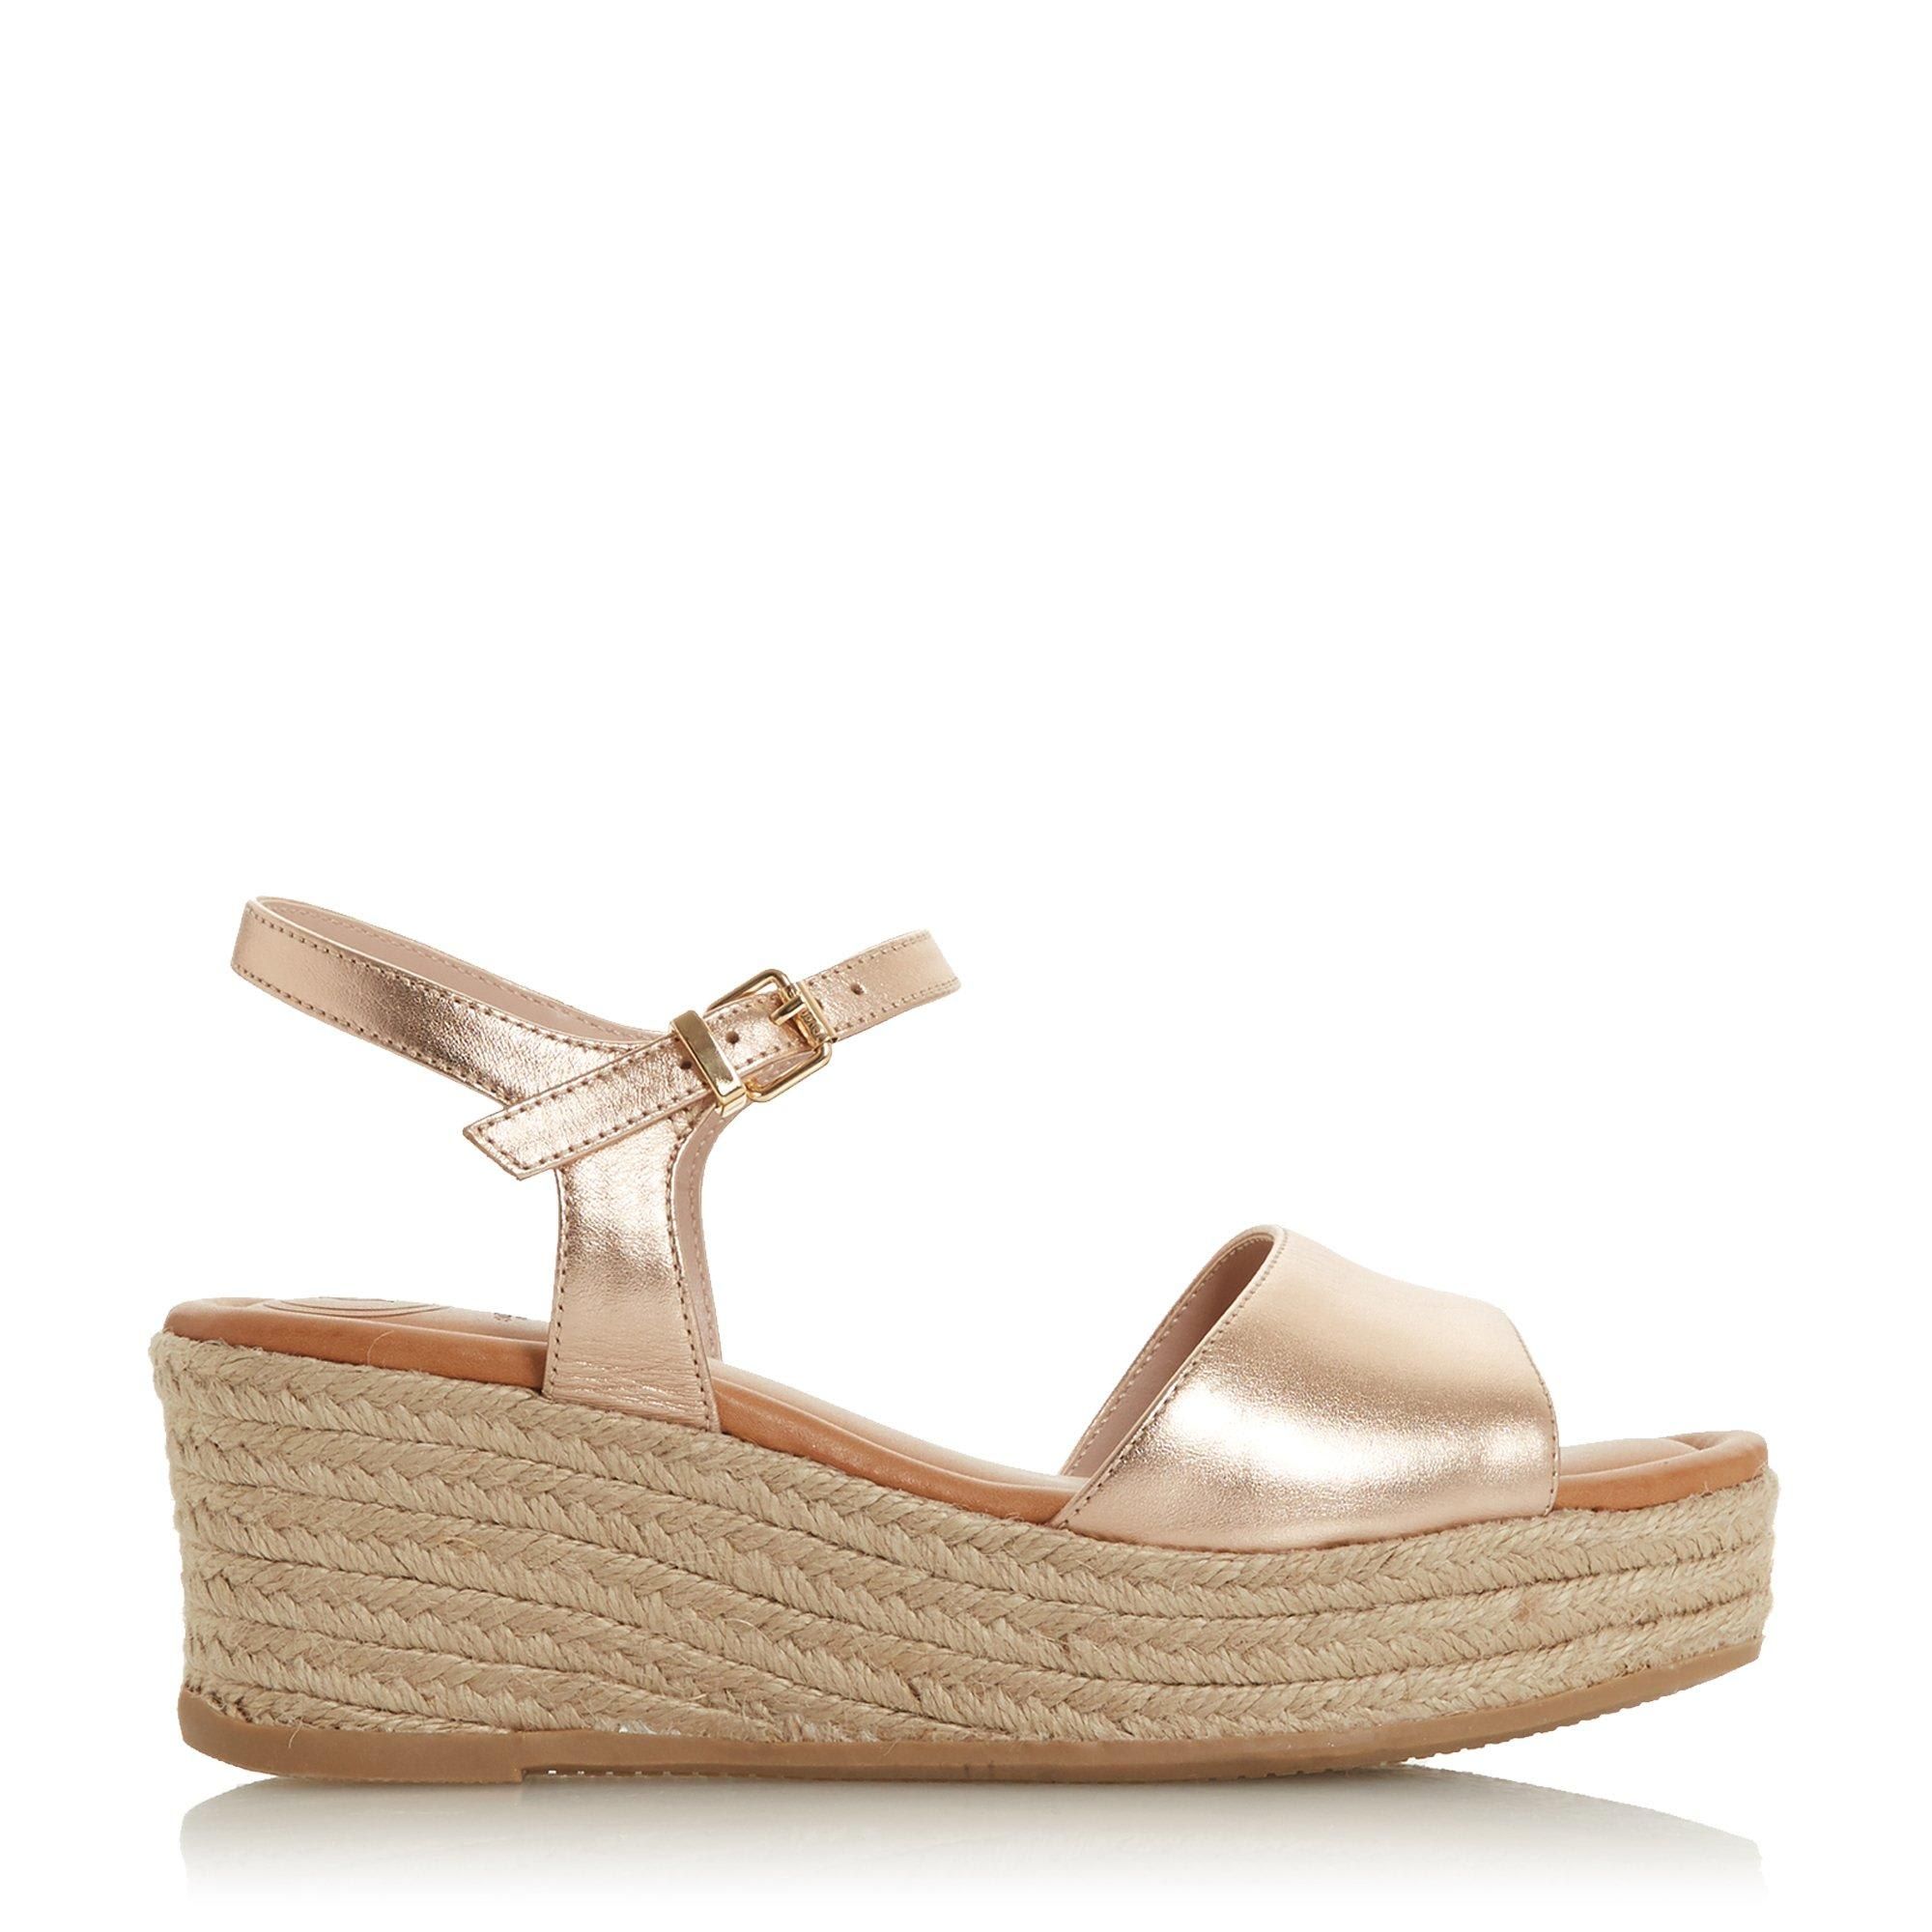 Exude effortless summer style with this sandal. Showcasing a two-part design with a front strap and open back. The buckle fastening and textured wedge heel complete the style.